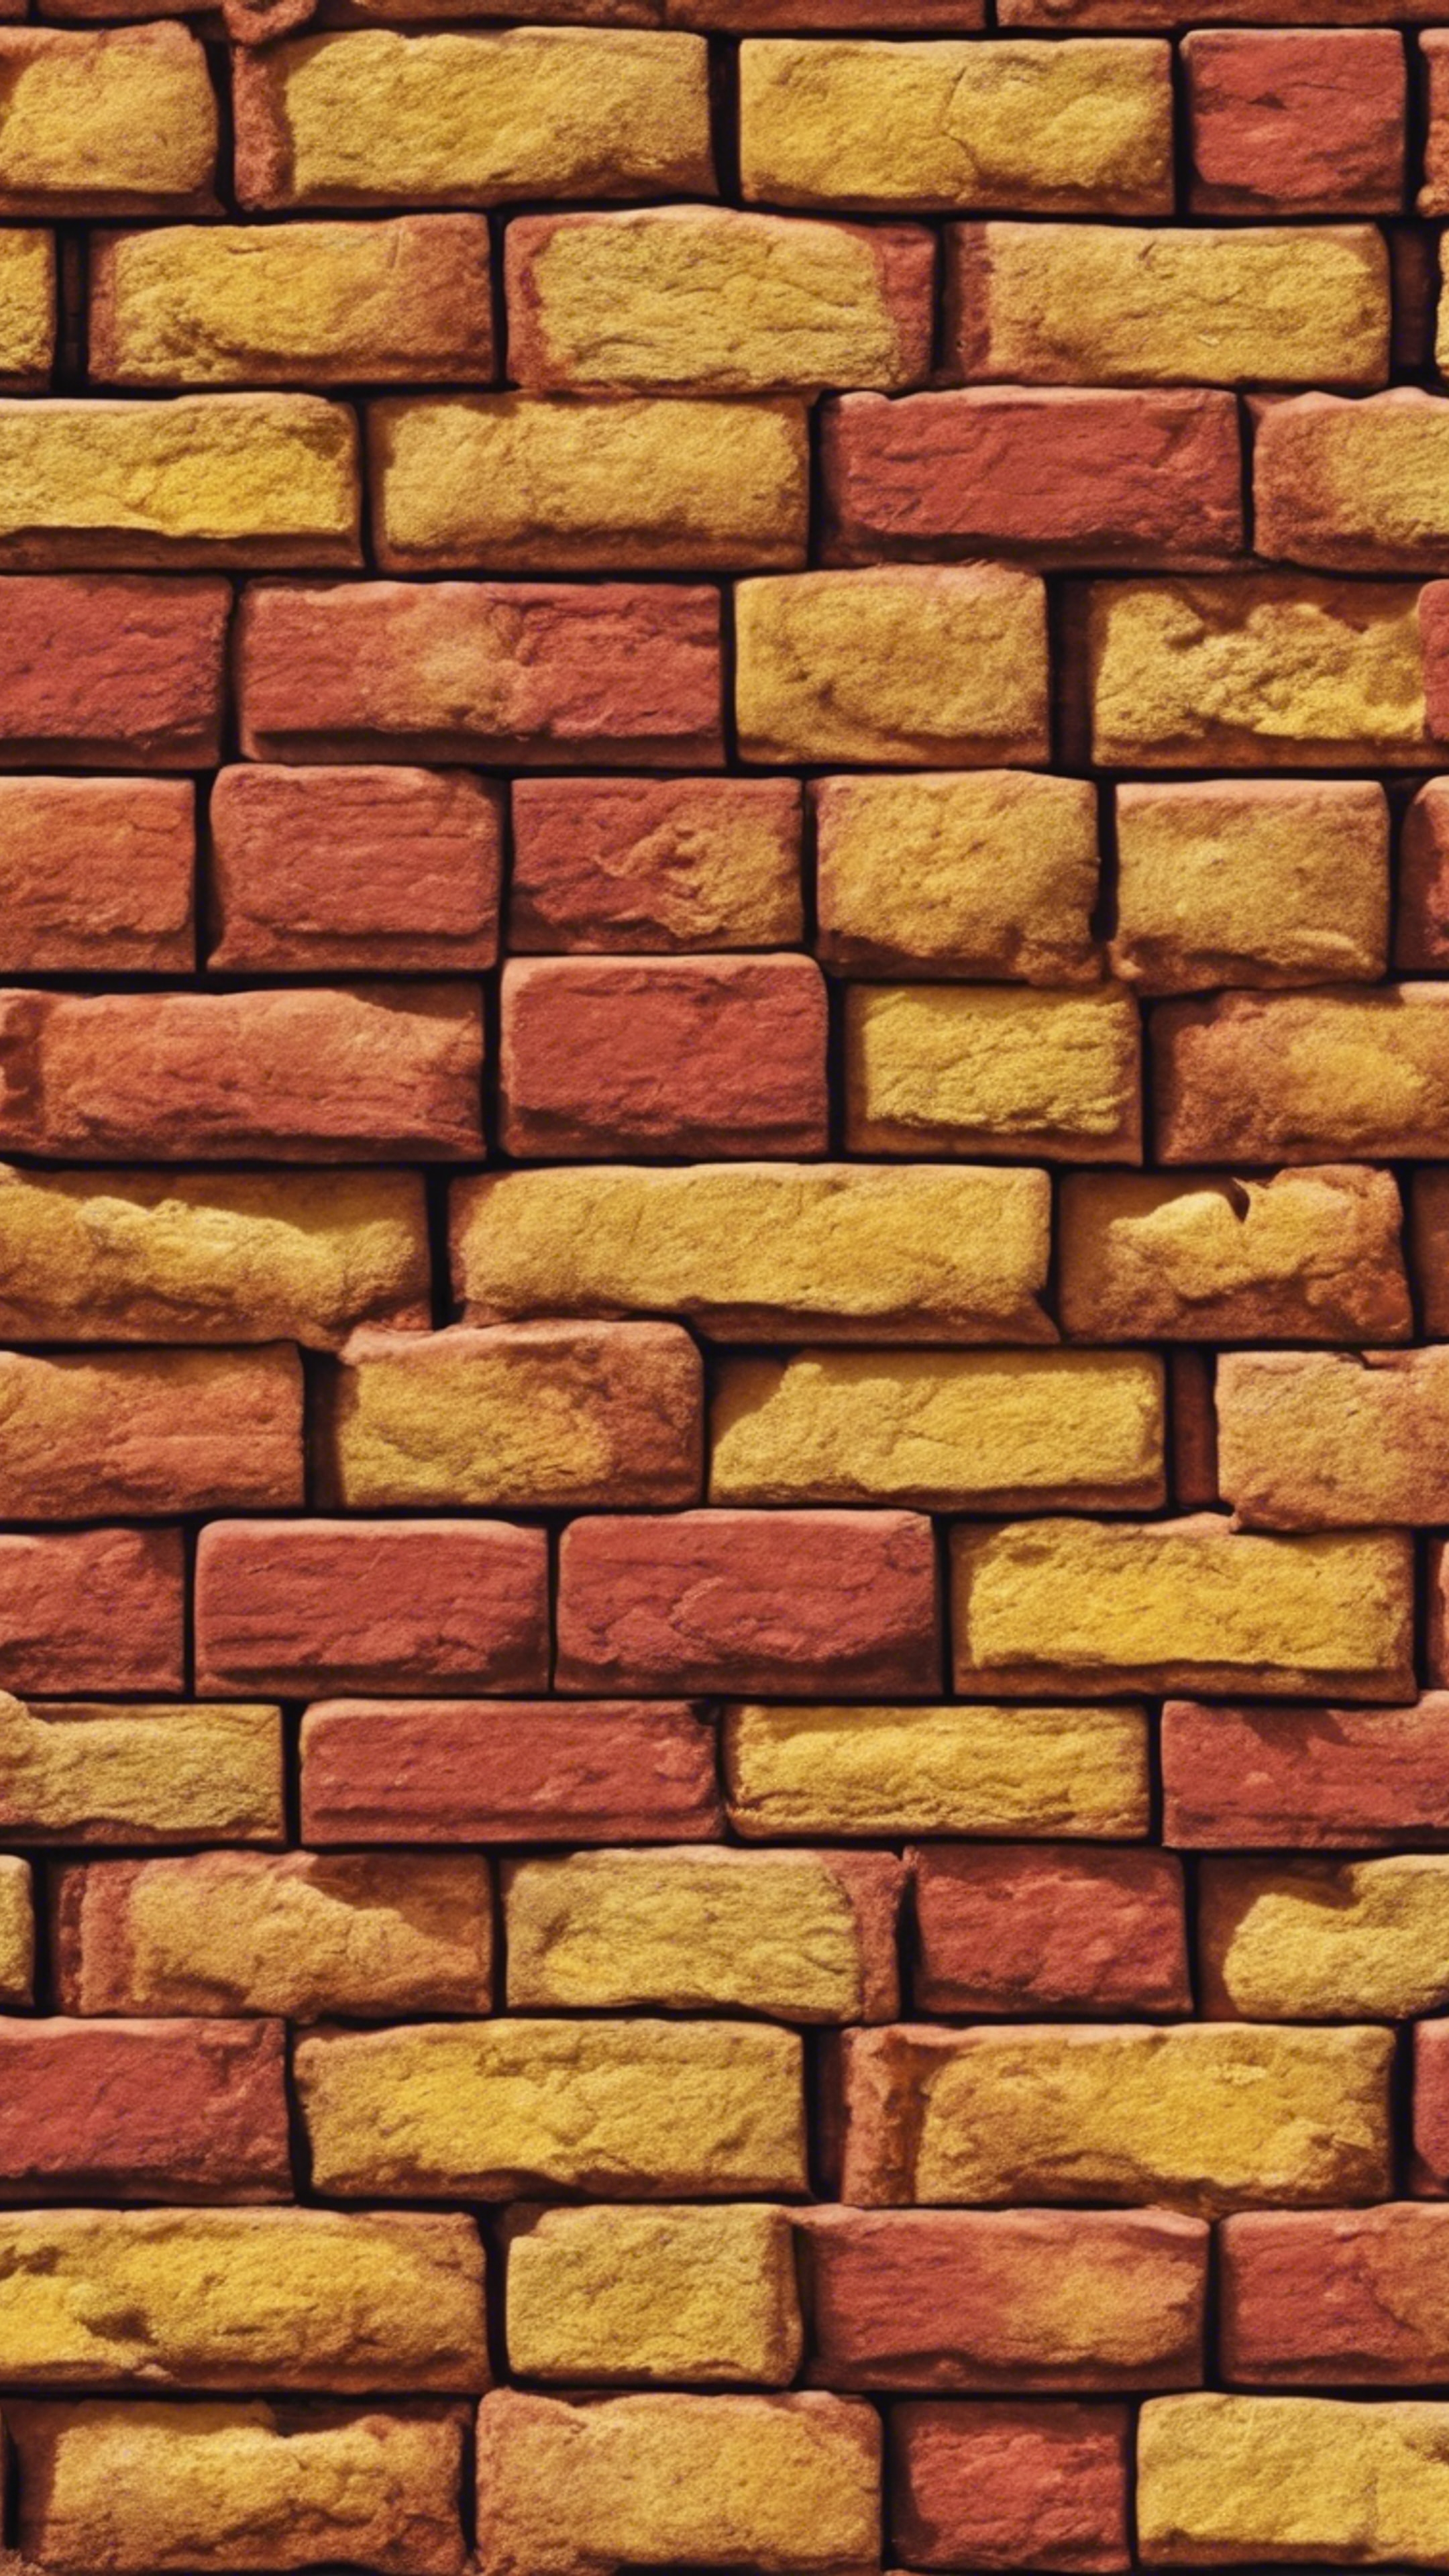 A wall made of red and yellow bricks fitted together in a seamless pattern. ورق الجدران[bcaa90a422a24f4f849c]